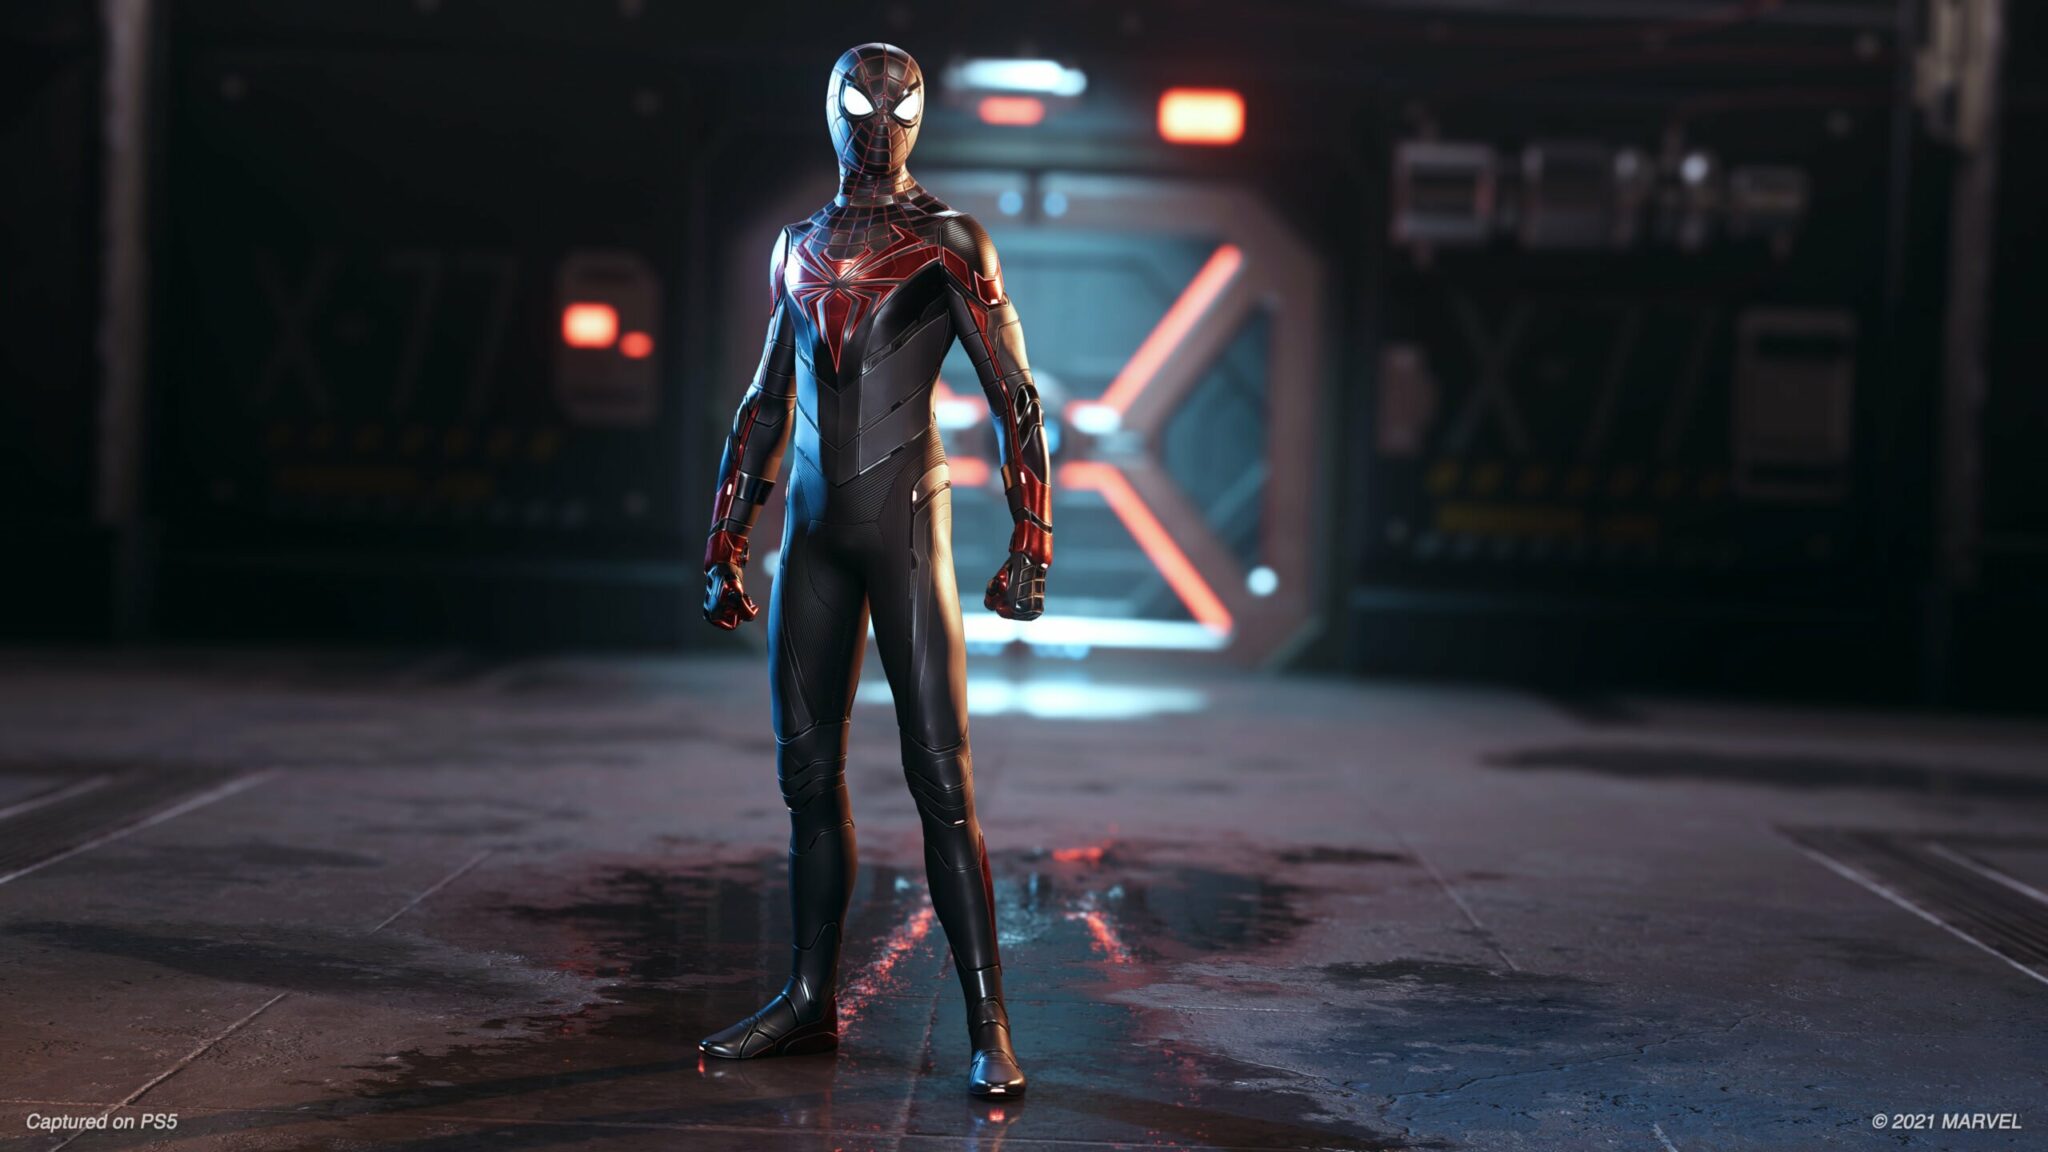 Spiderman-New-Suit-scaled